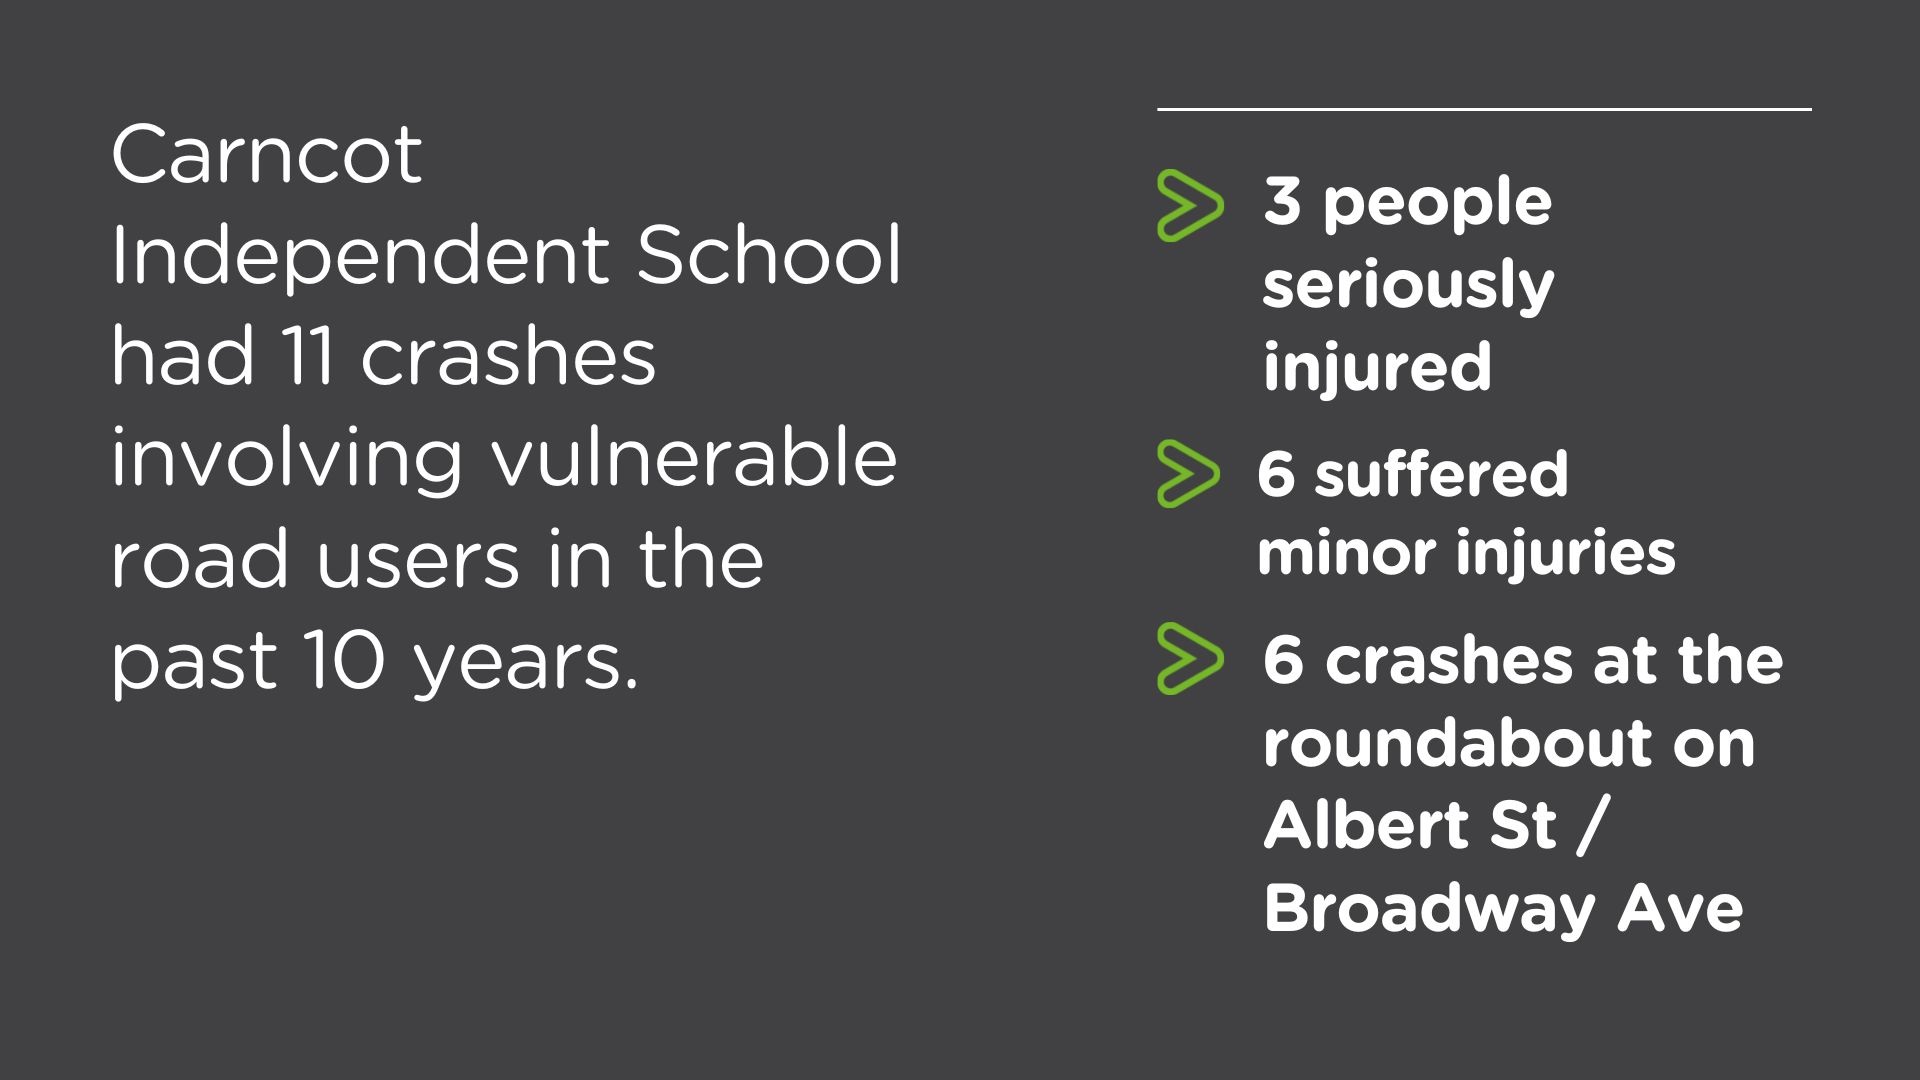 Image shows injury and crash numbers around Carncot Independent School in the past 10 years